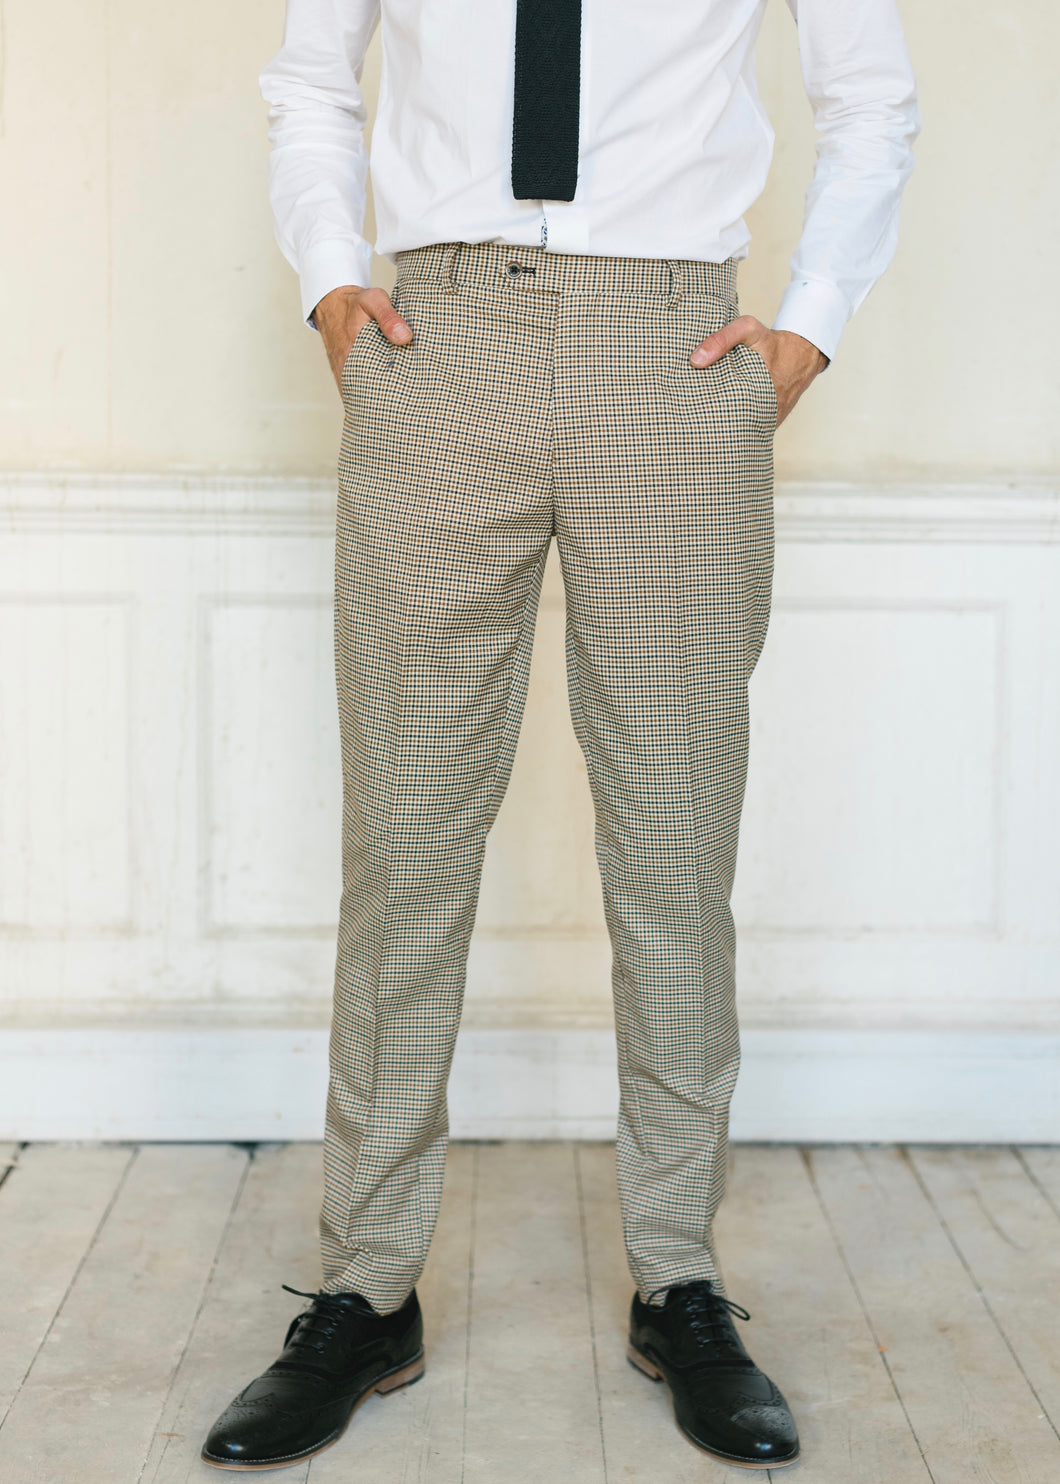 Cavani Elwood Houndstooth Checked Trousers worn with black shoes and a knit tie on a white Suave Owl crisp shirt